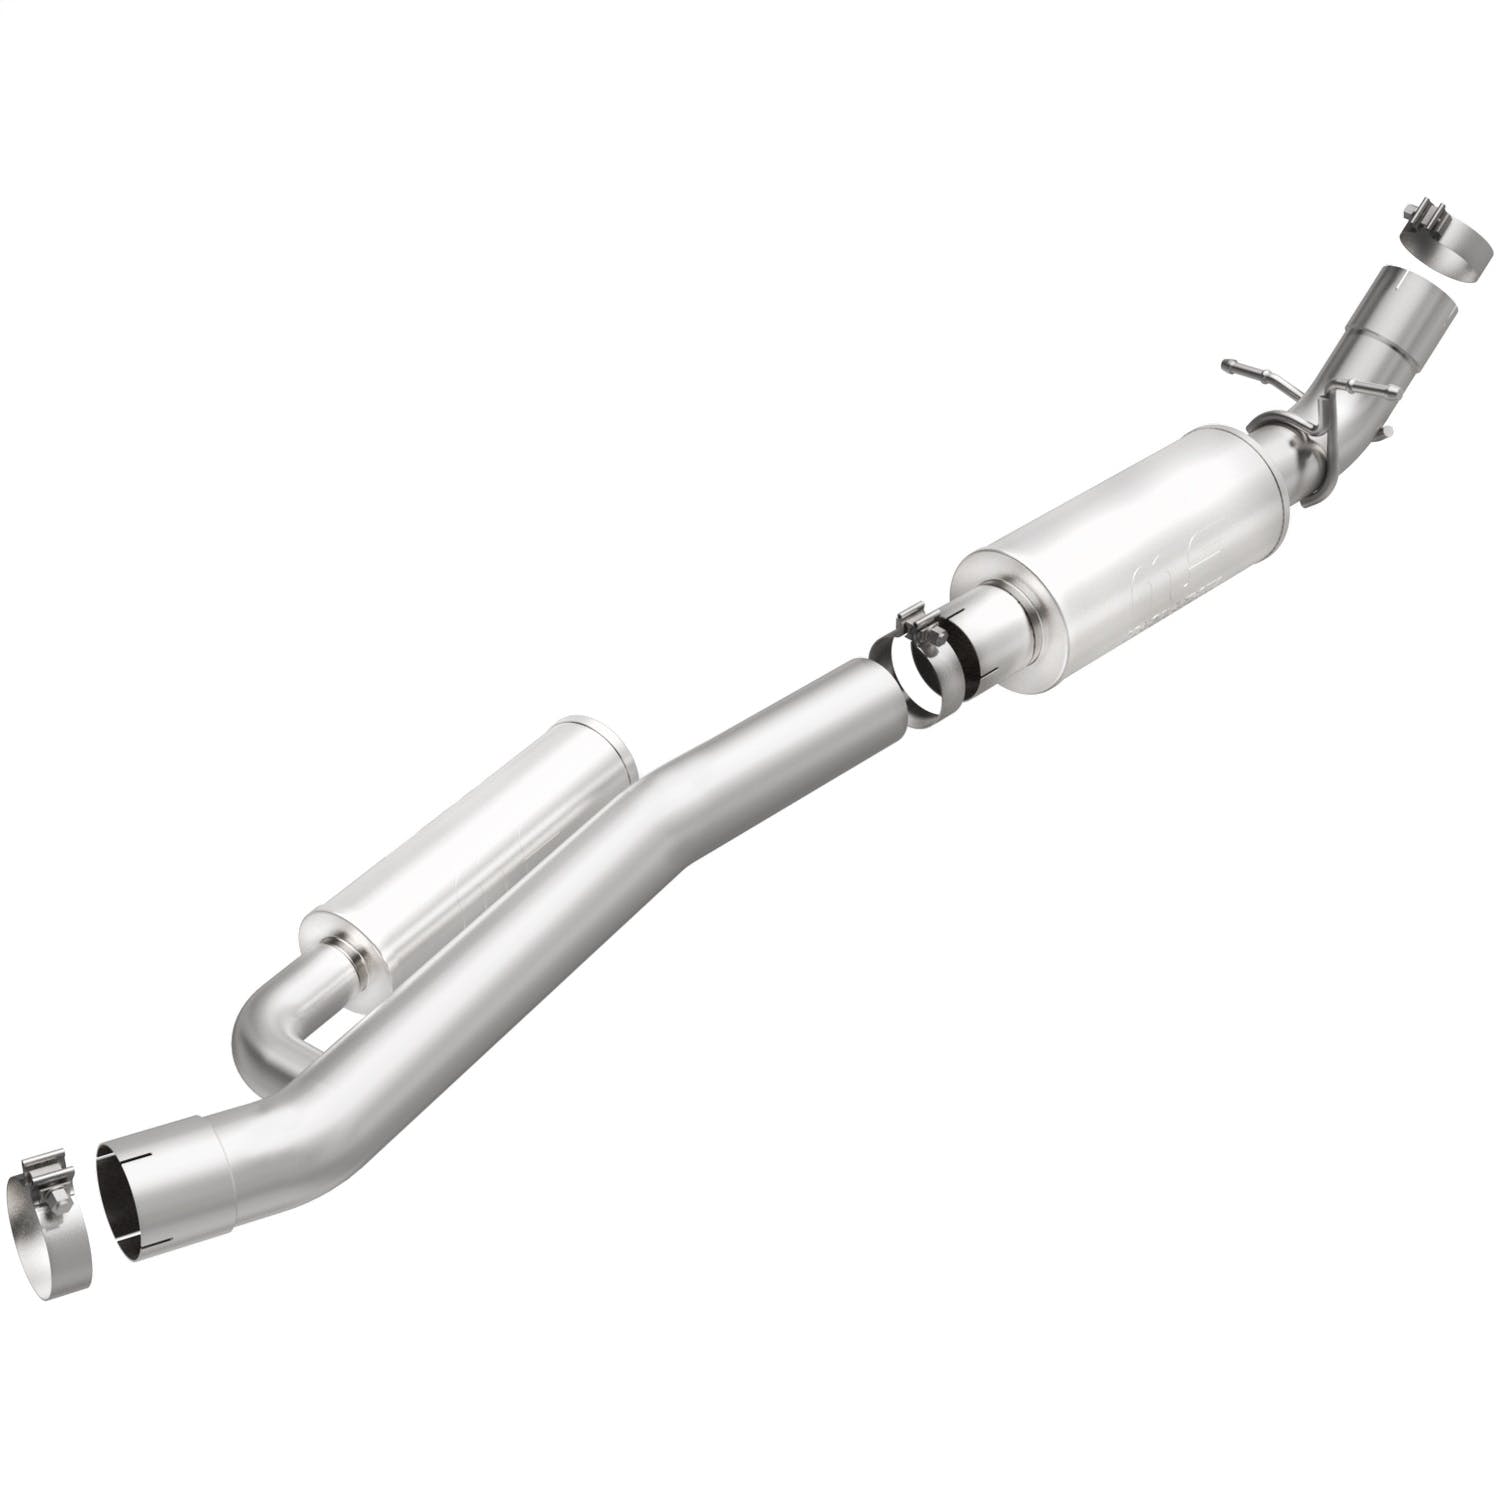 MagnaFlow Exhaust Products 19534 Direct-Fit Muffler Replacement Kit With Muffler